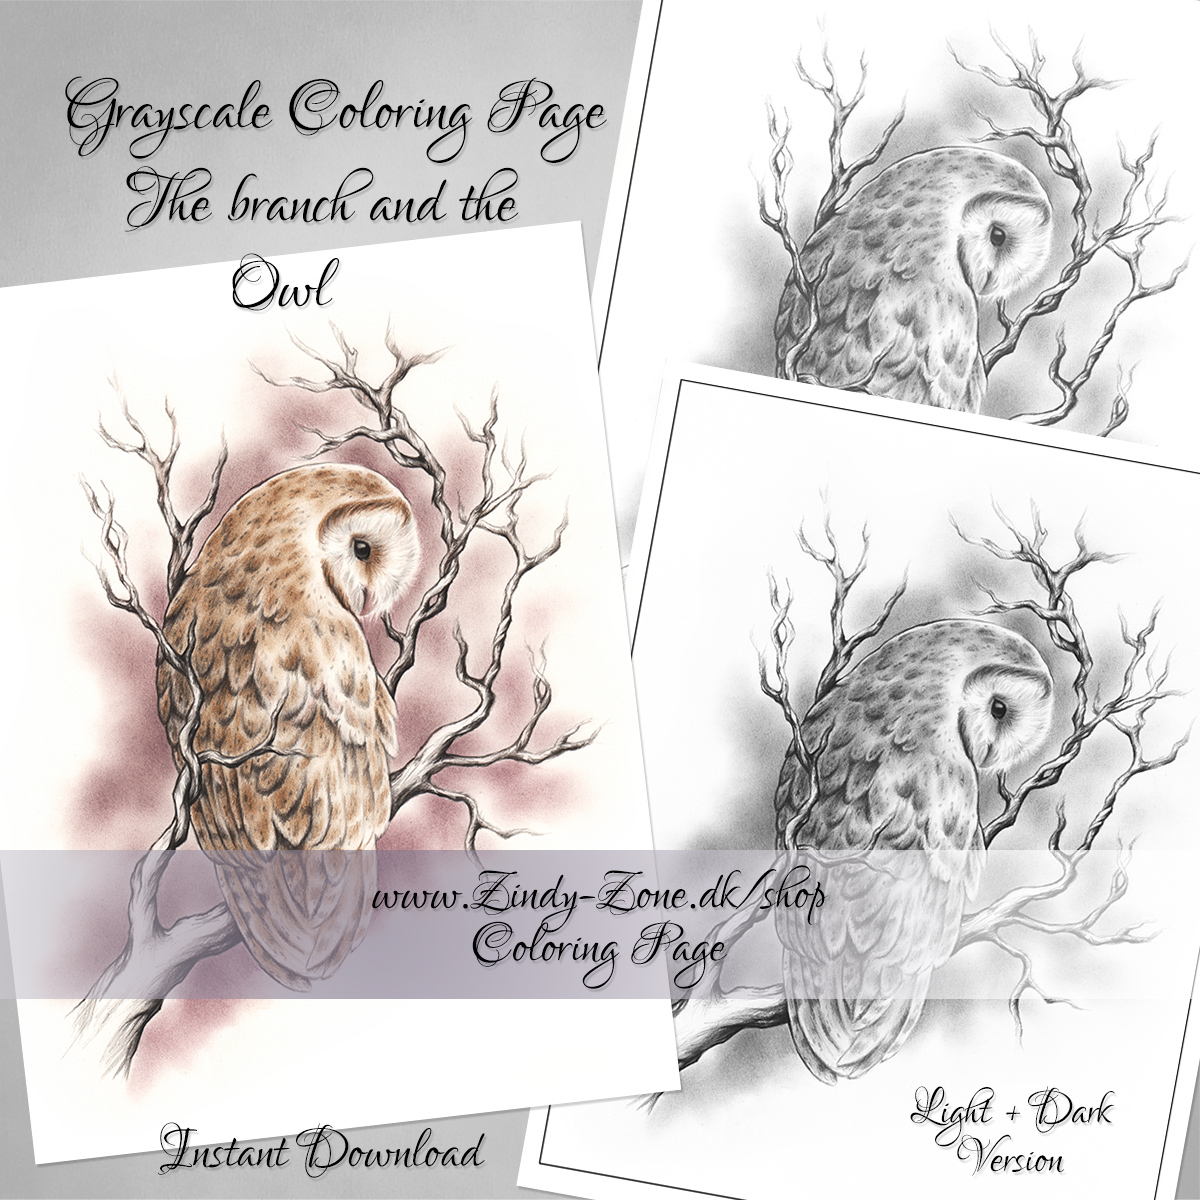 The Branch and the owl Coloring Page - Grayscale